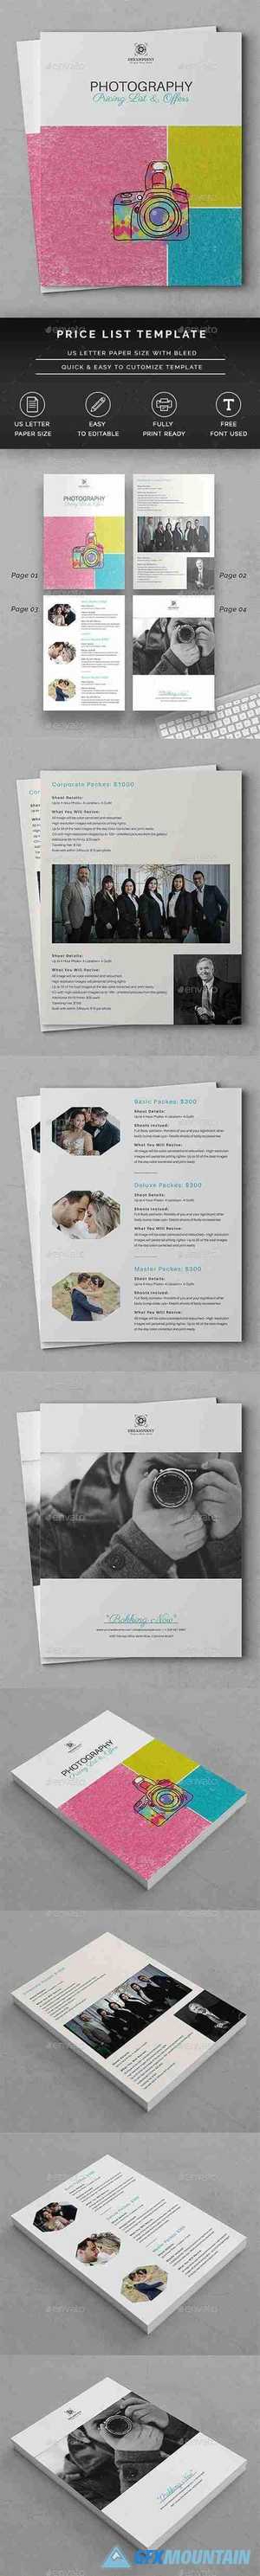 Photography Price List Template 26680958